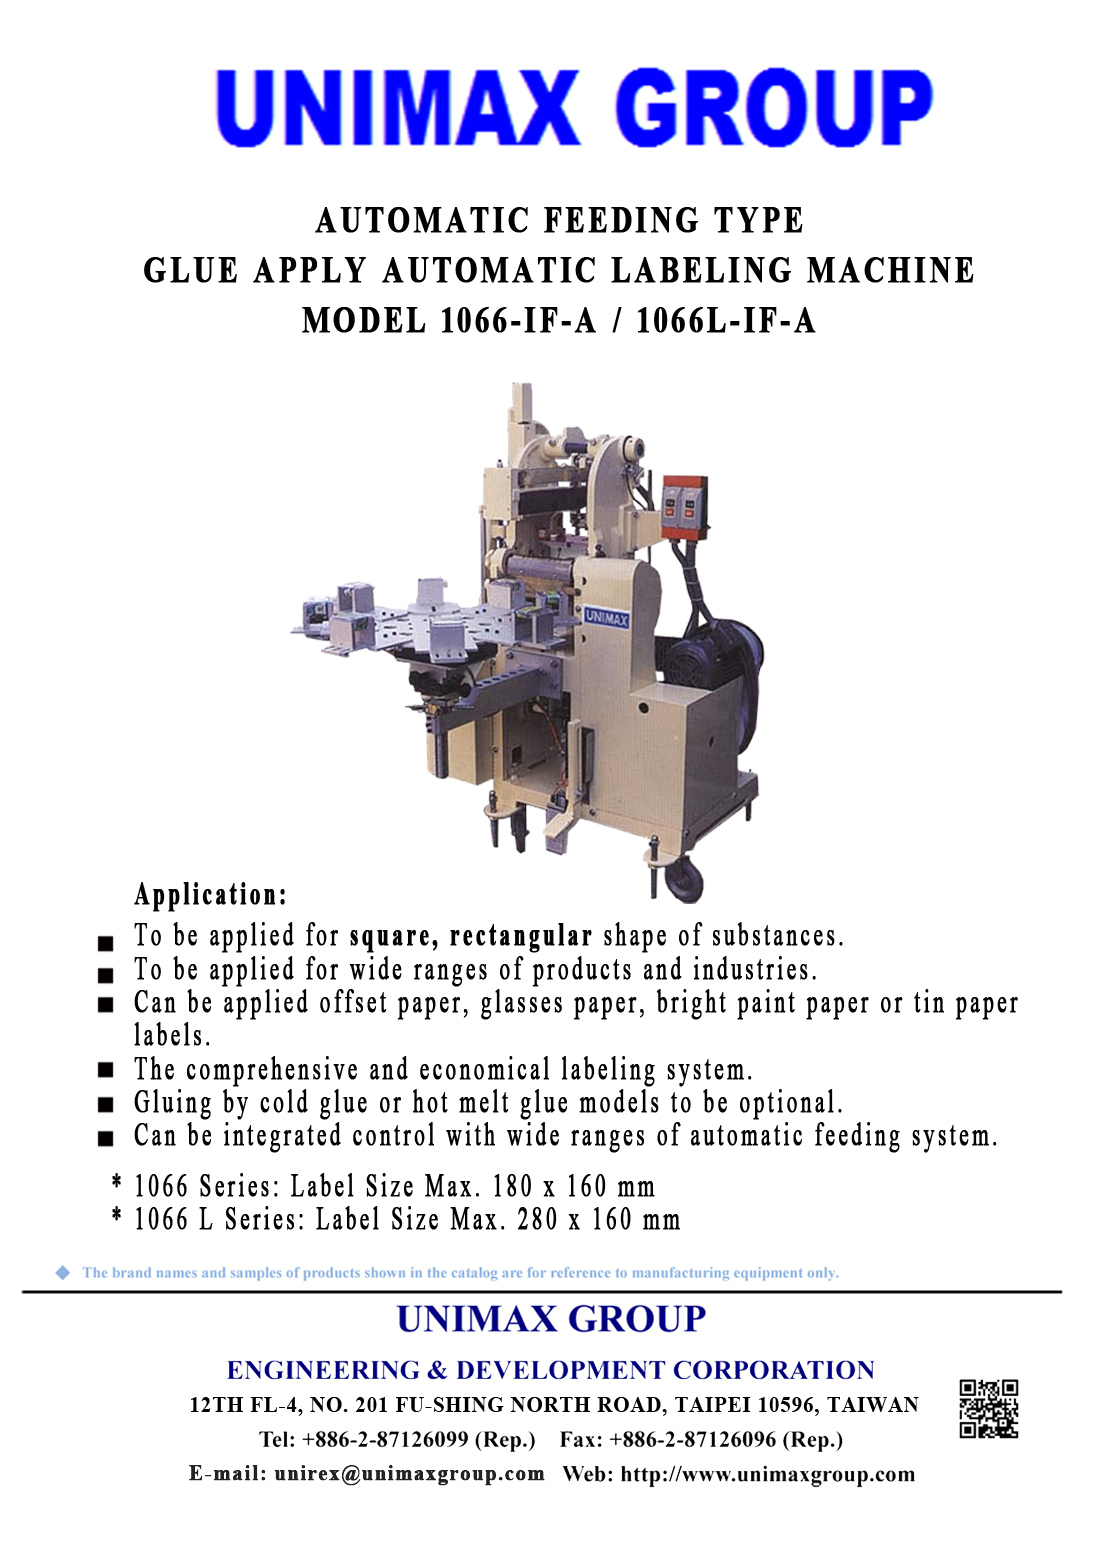 Indexing Automatic Feeding Type 66-IF-A / 66L-IF-A Labeling Machine